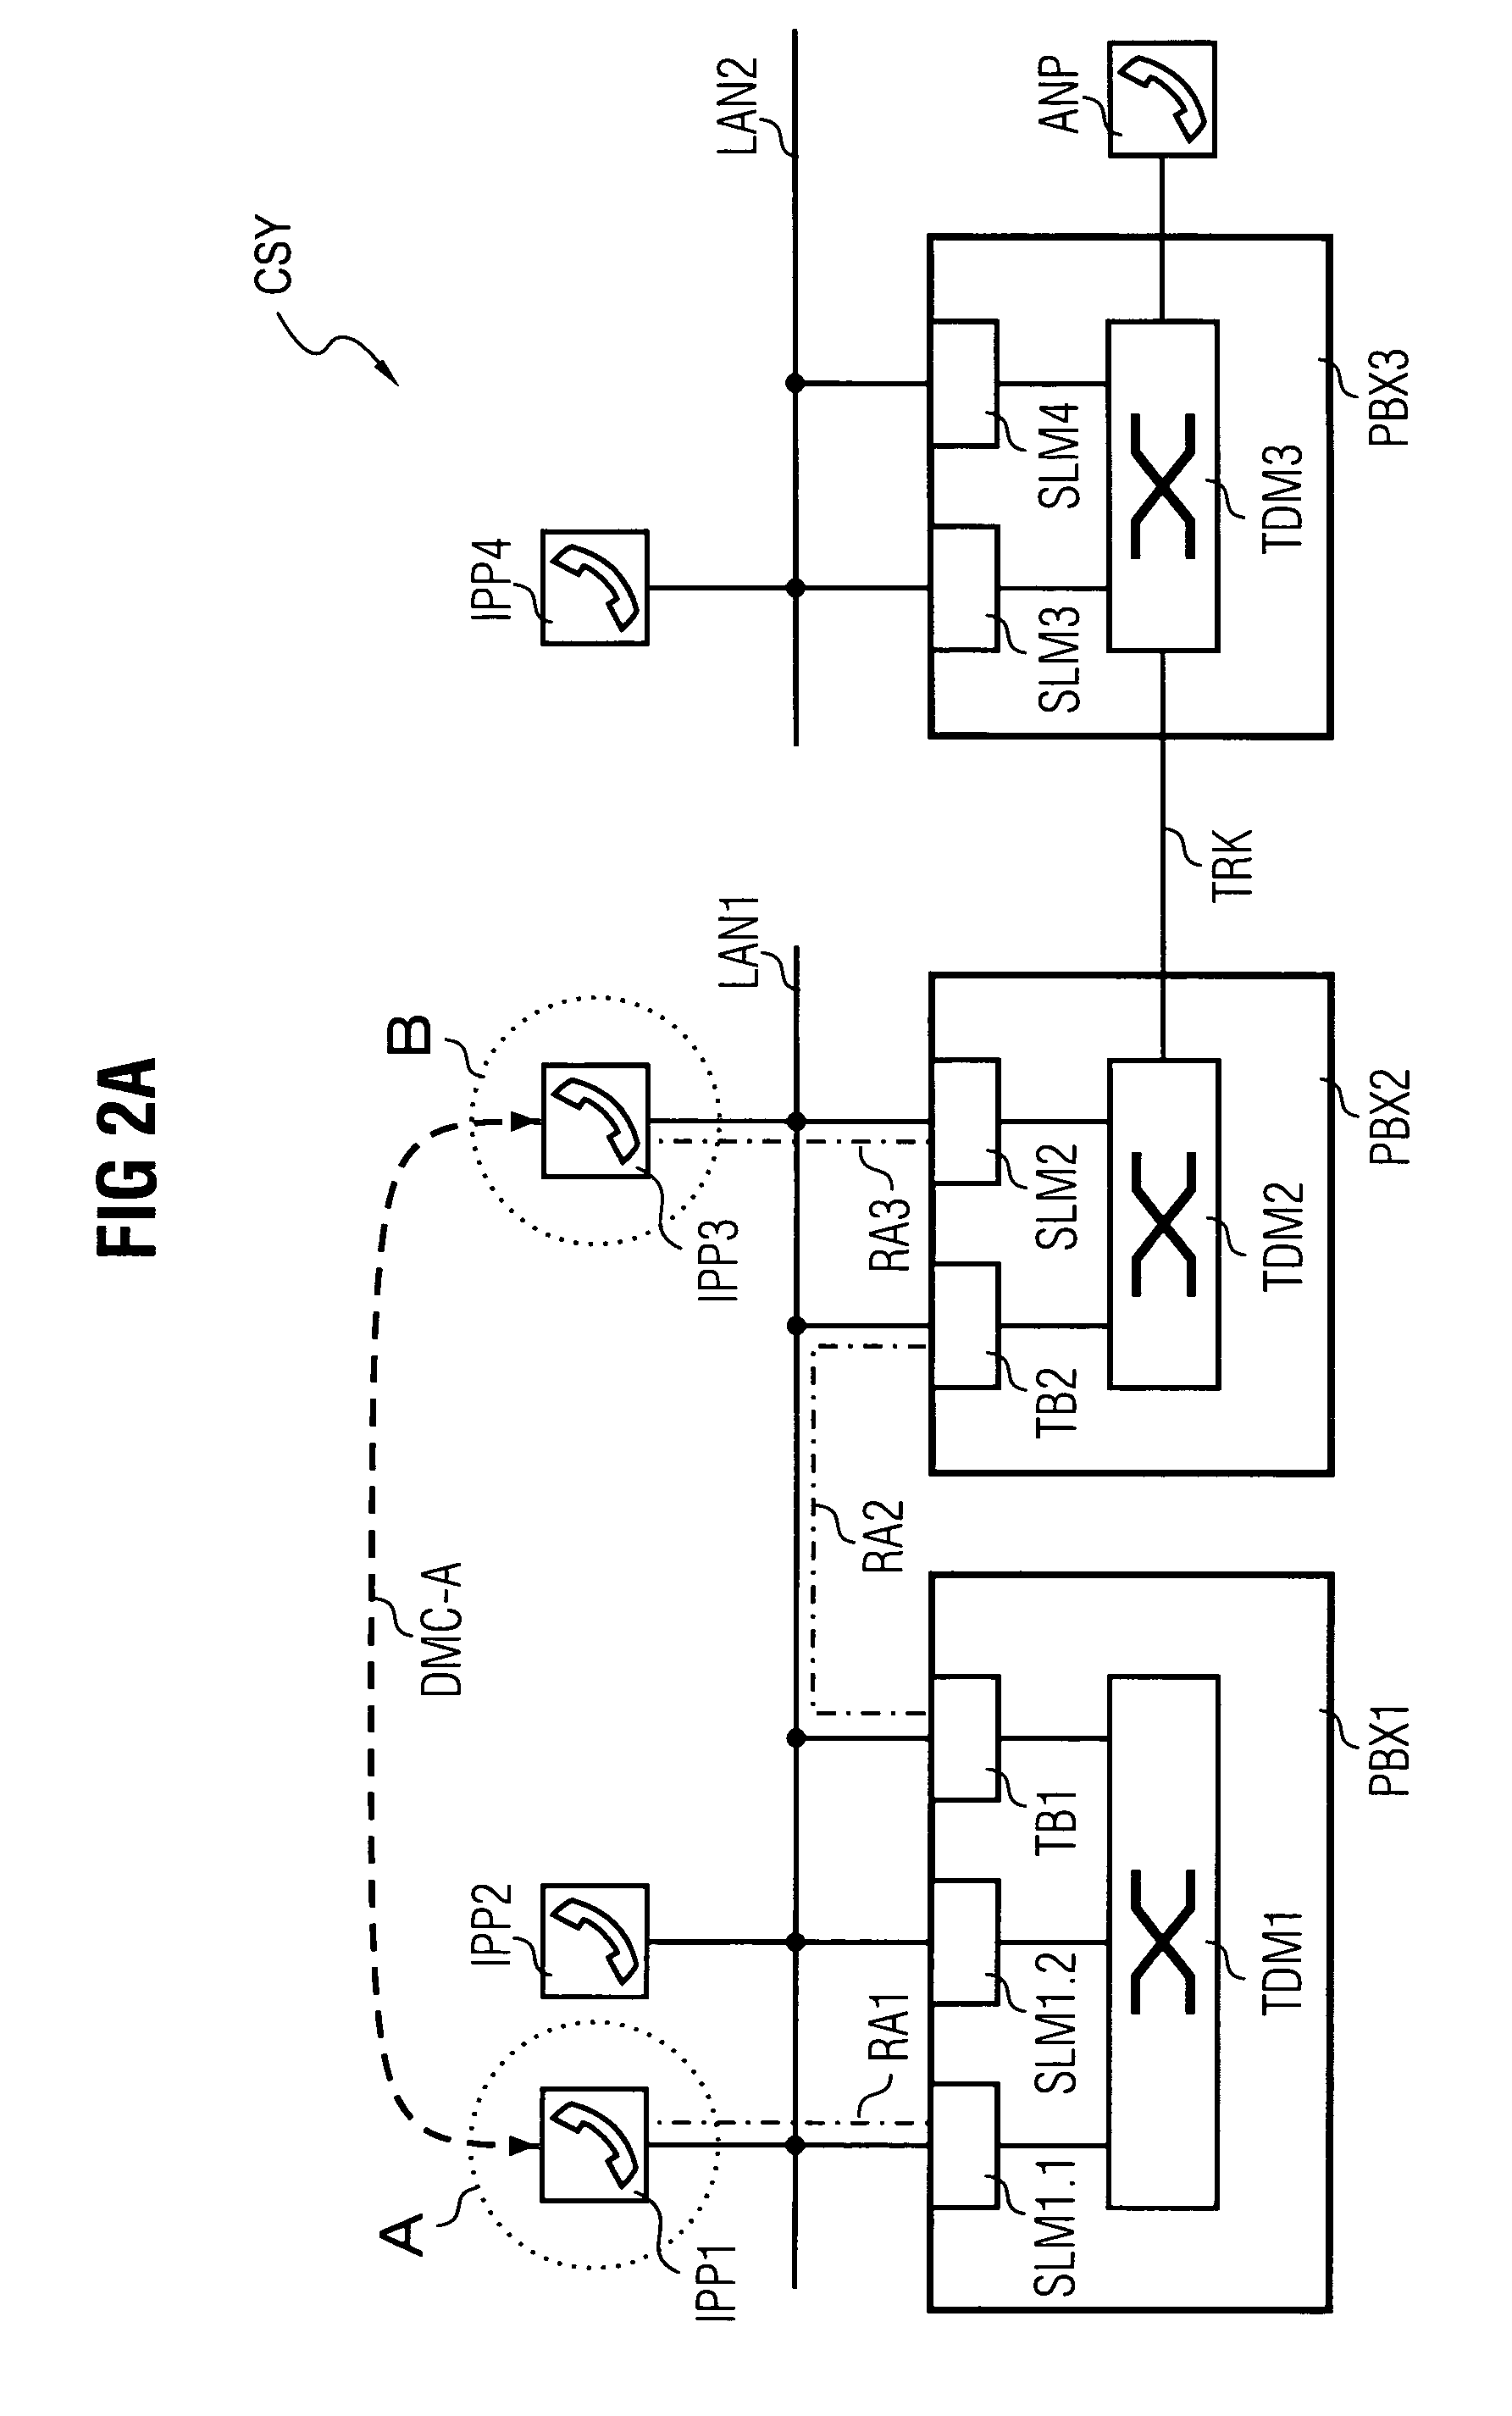 Method for transmitting communication data in a communication system